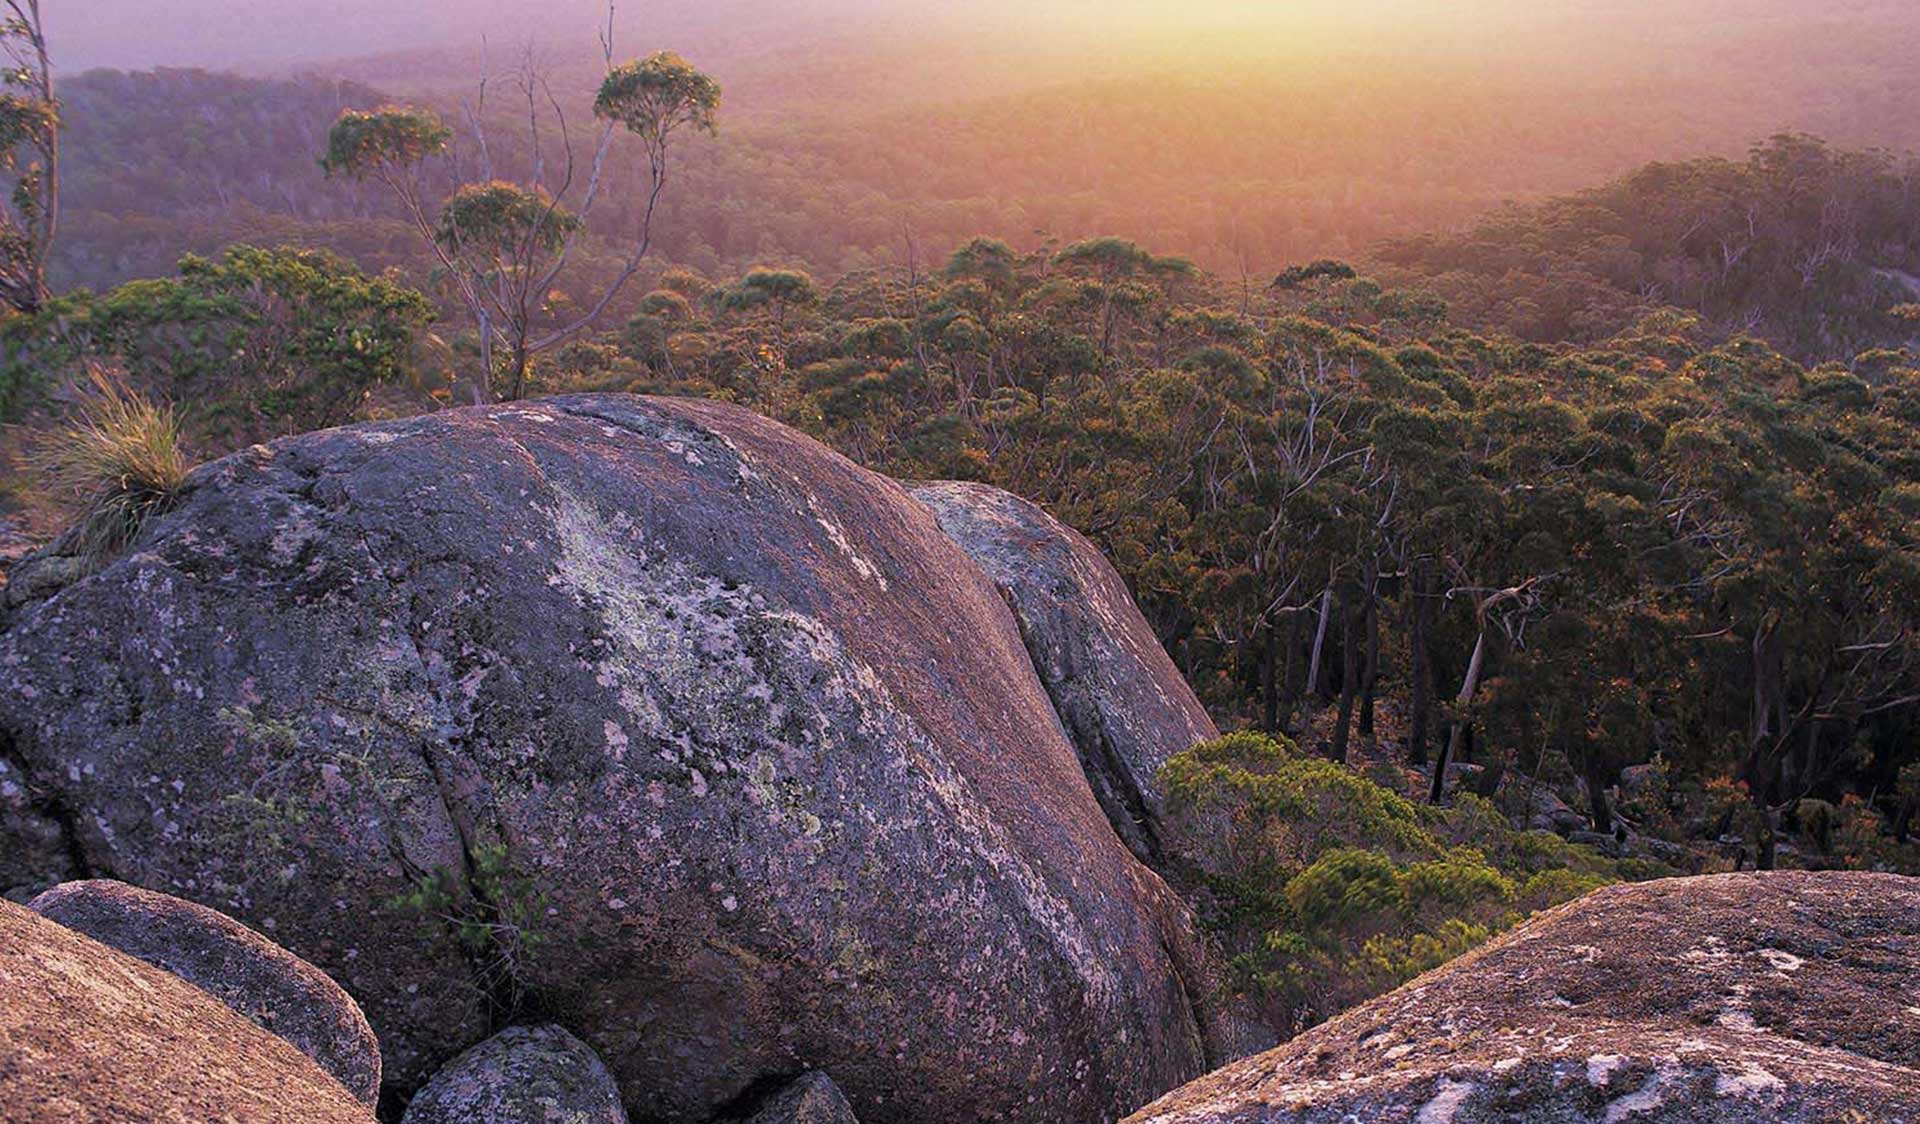 The view from Genoa Peak at sunset in the Croajingolong National Park near Mallacoota.